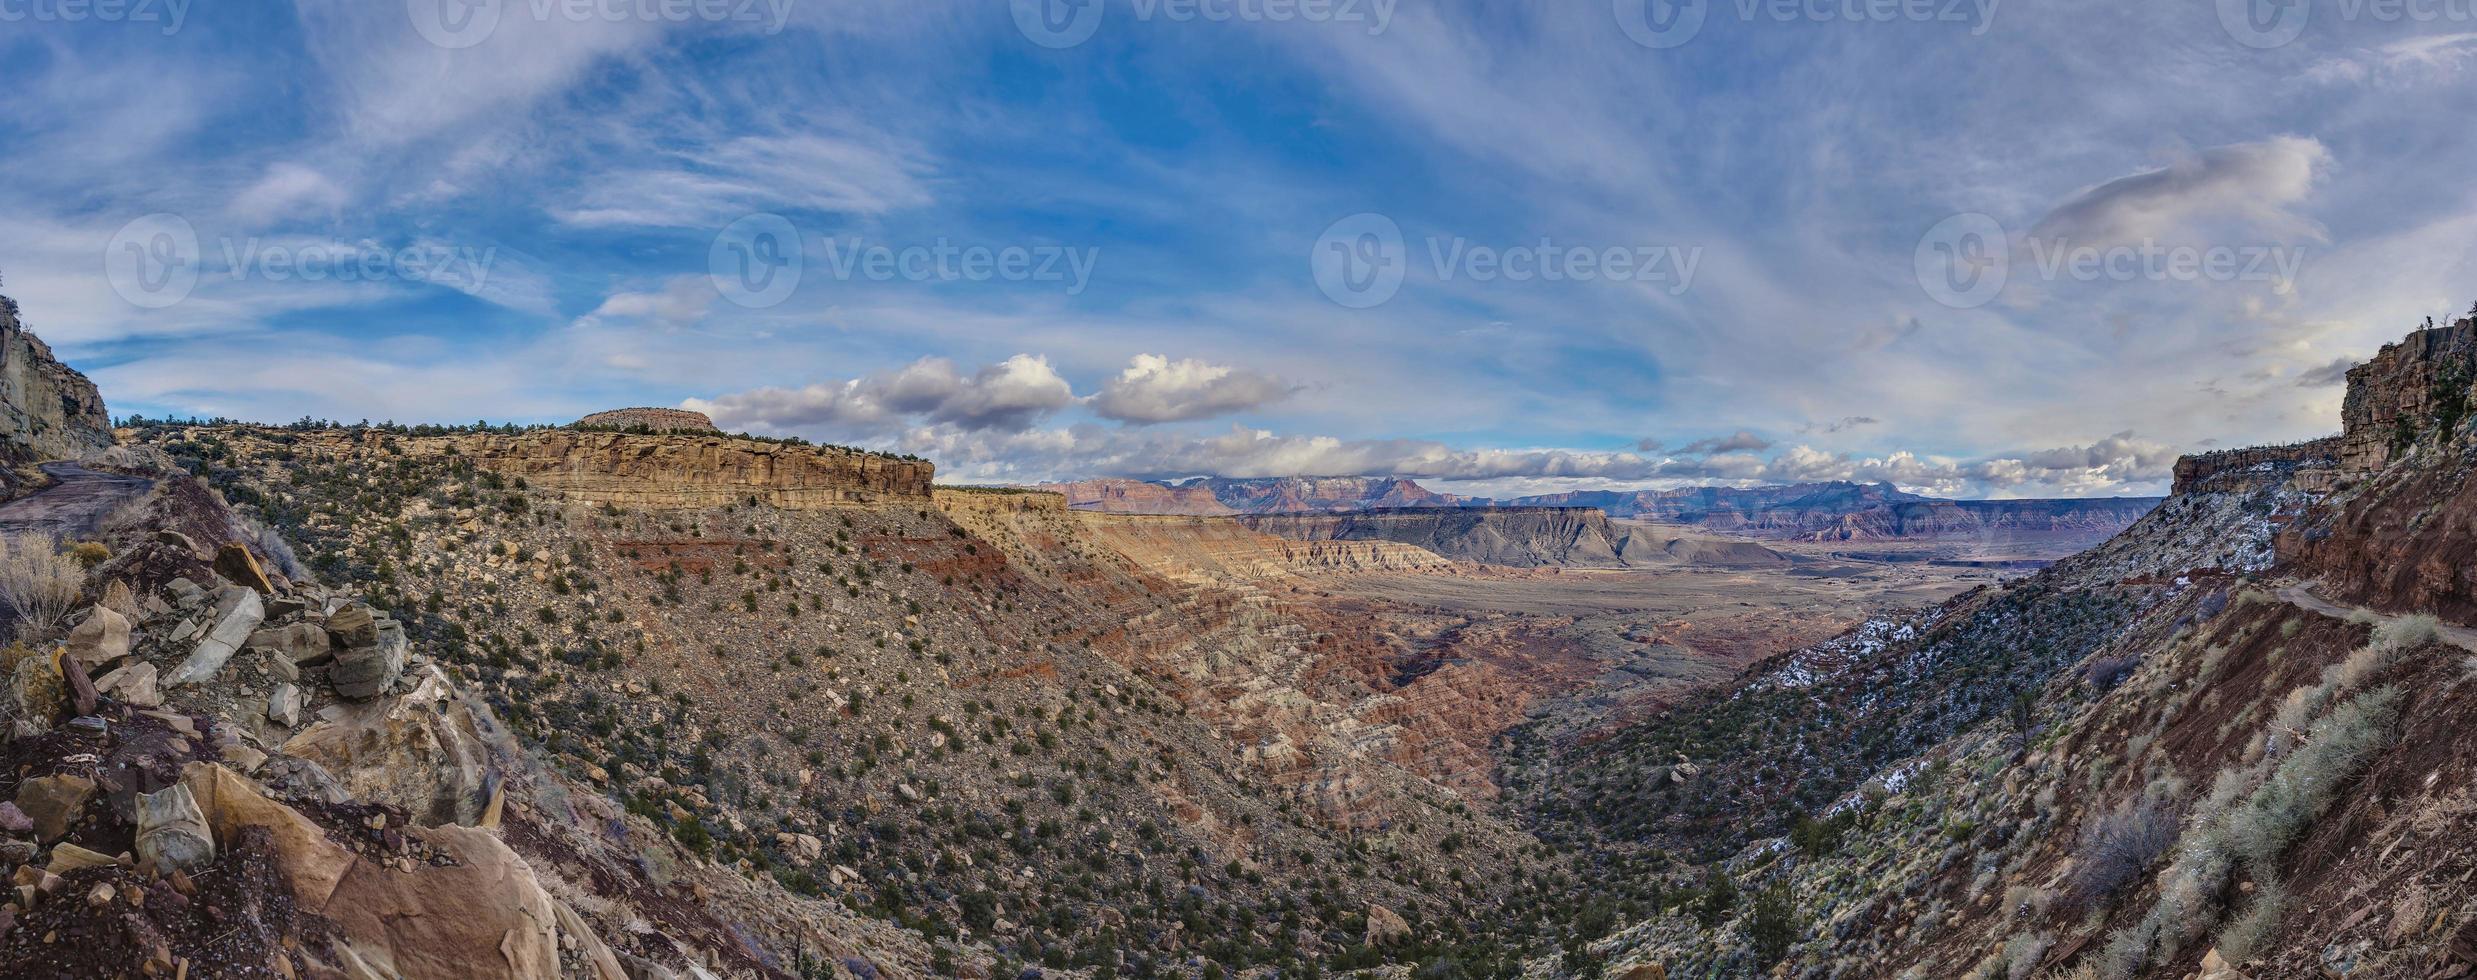 Panoramic view from Arizona desert in winter from elevated perspective photo